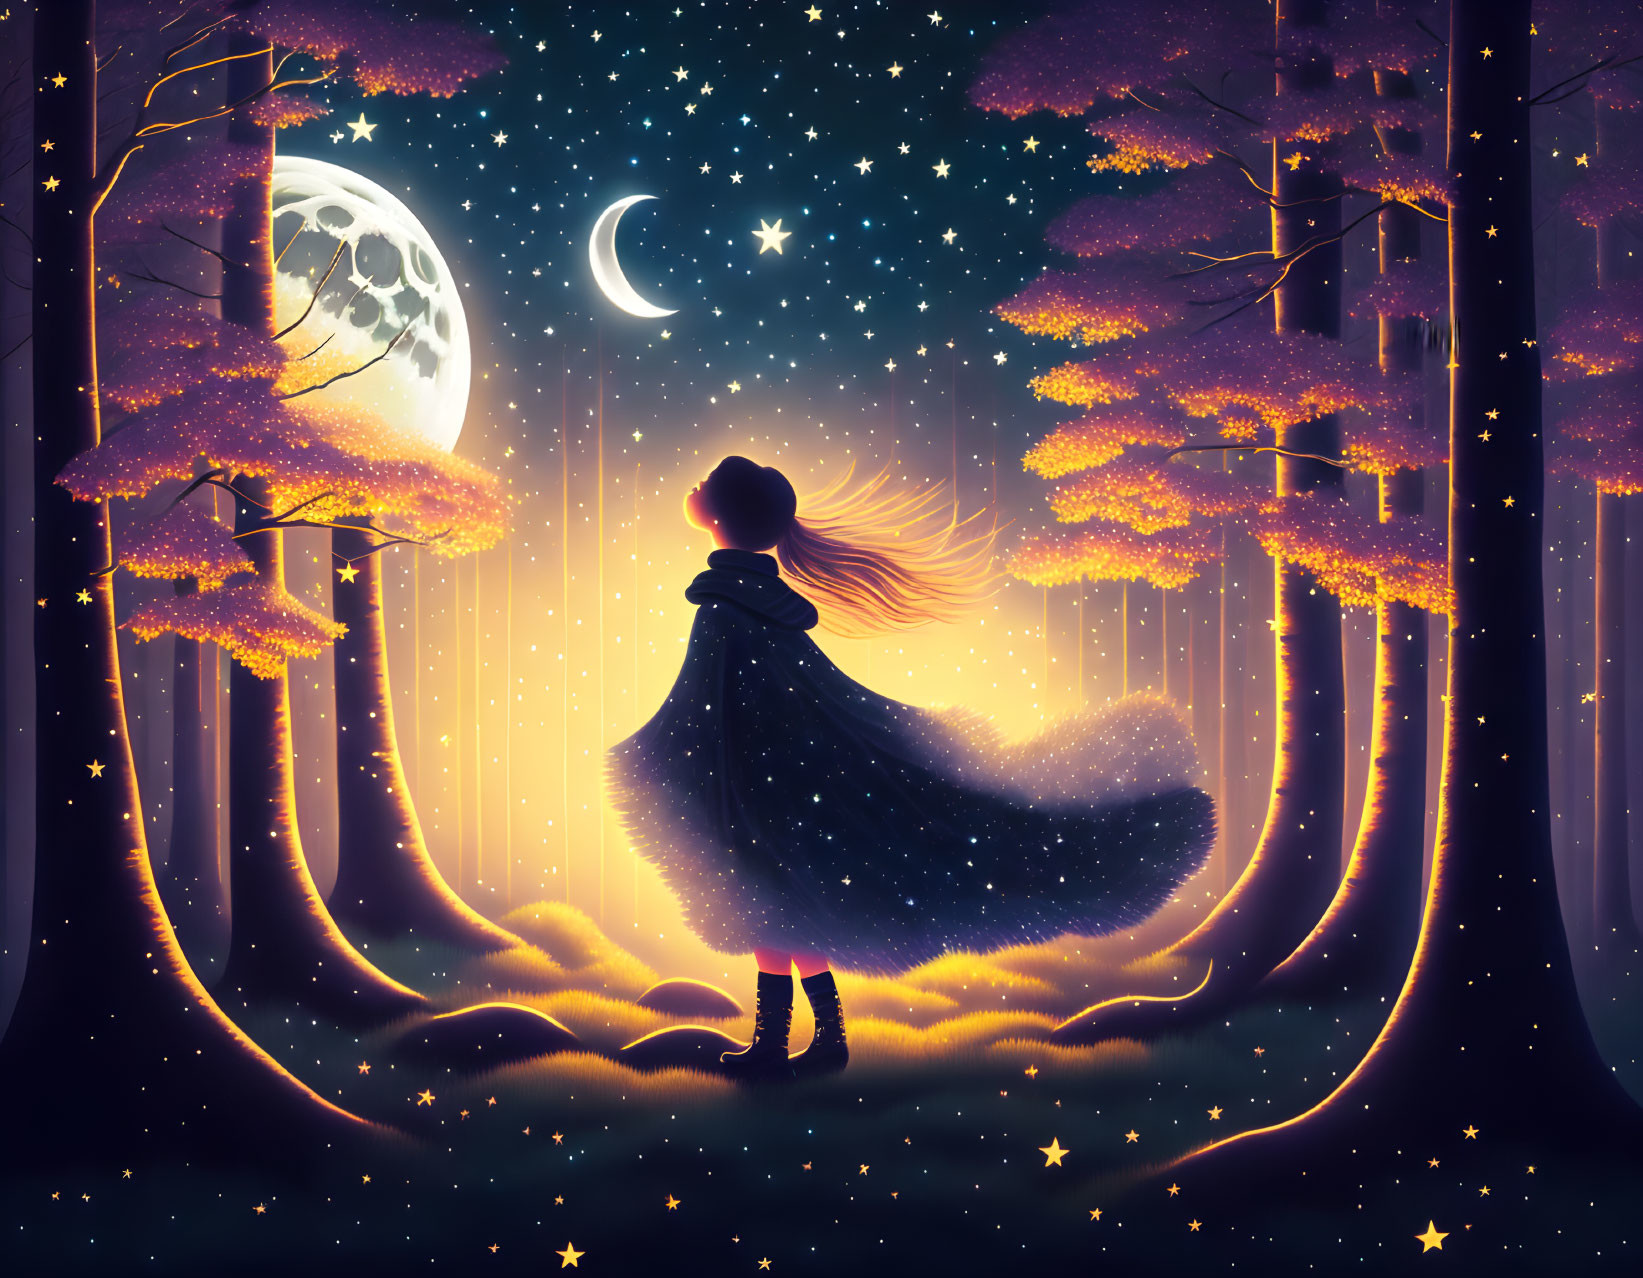 Girl in cape in enchanted forest under starry sky with glowing trees and crescent moon